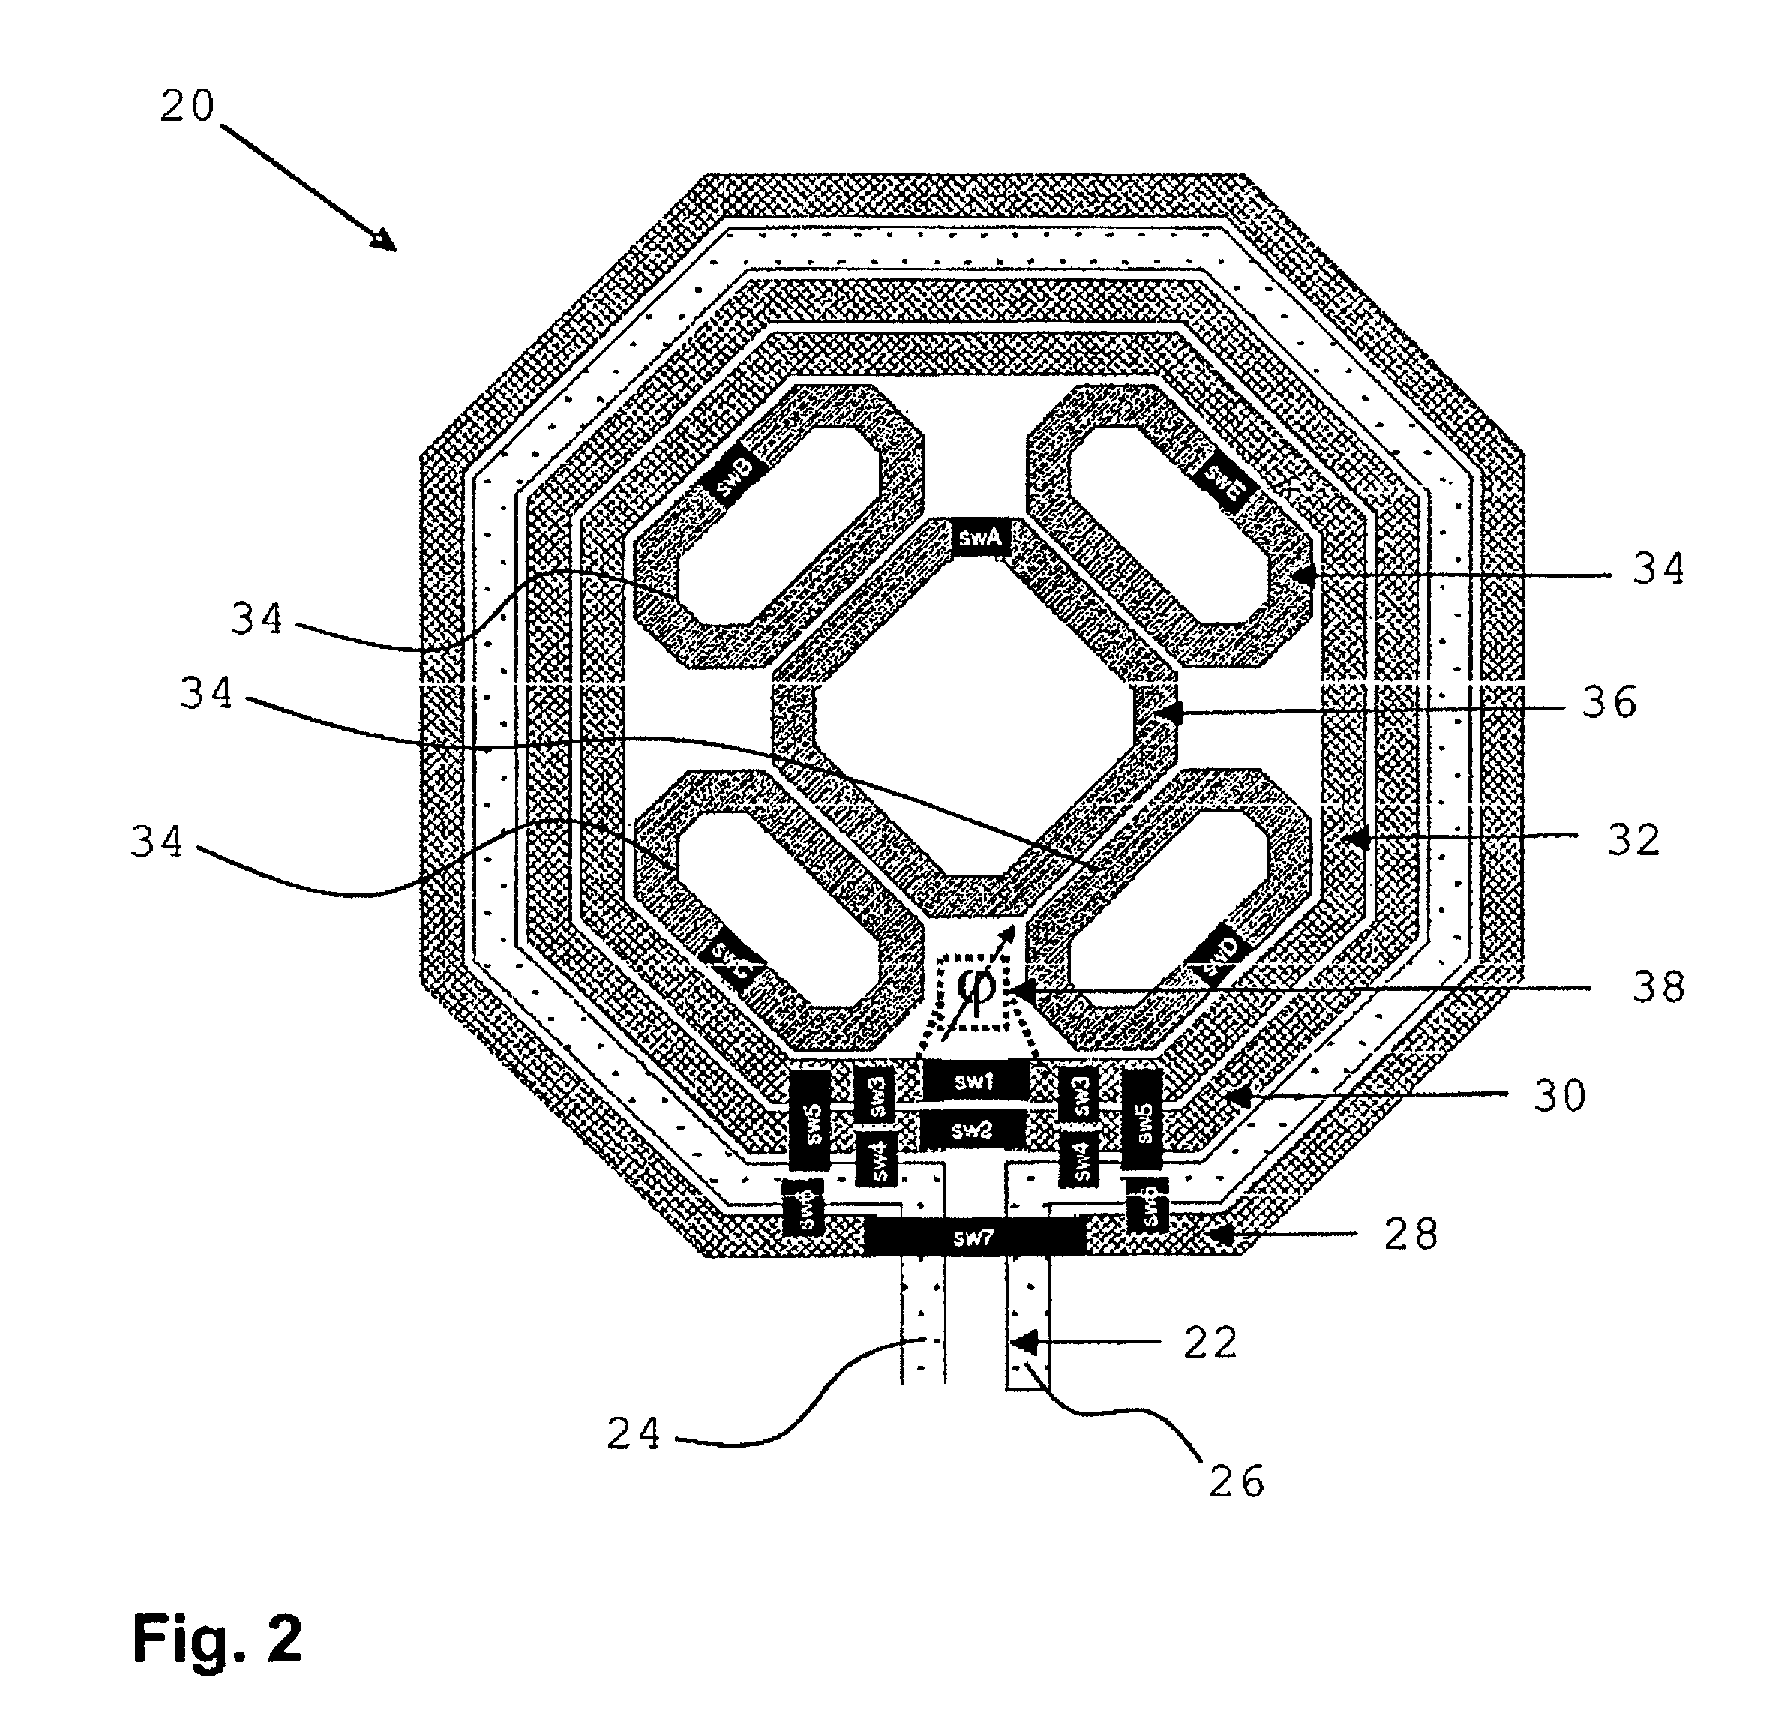 Inductor combining primary and secondary coils with phase shifting